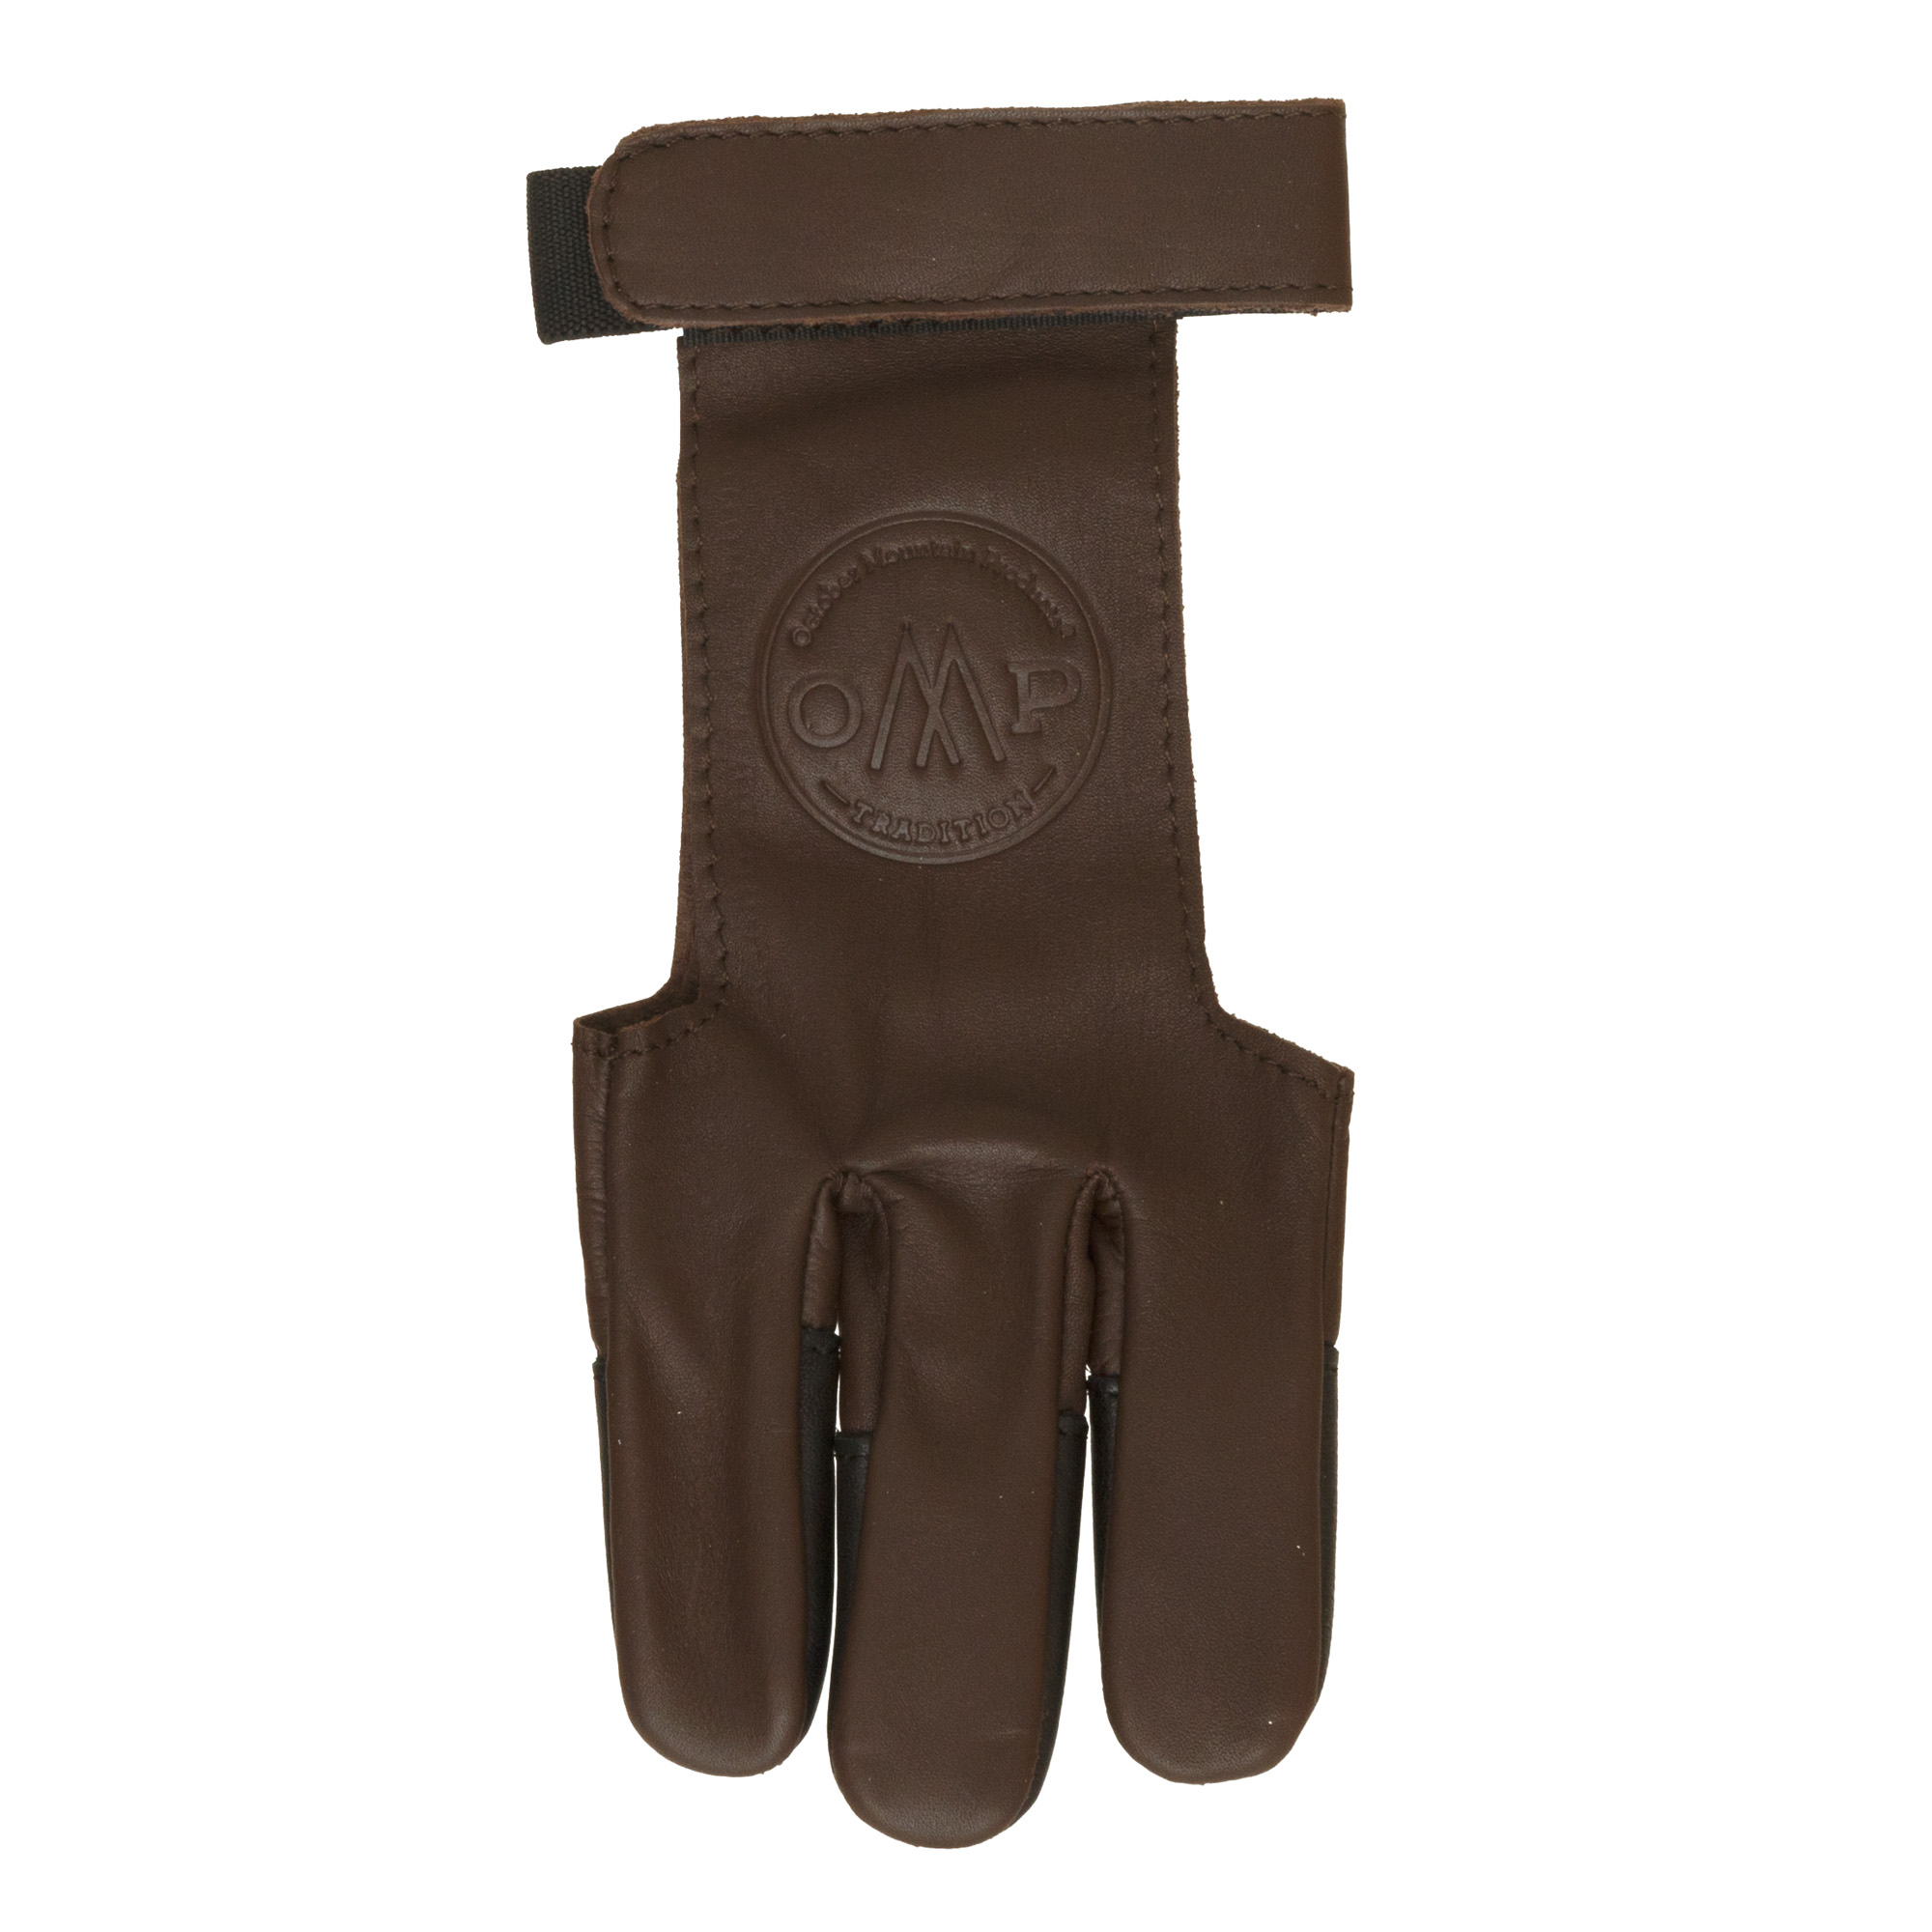 TRADITIONAL ARCHERY SHOOTING GLOVE ARM GUARD COW LEATHER HL#309 BROWN.